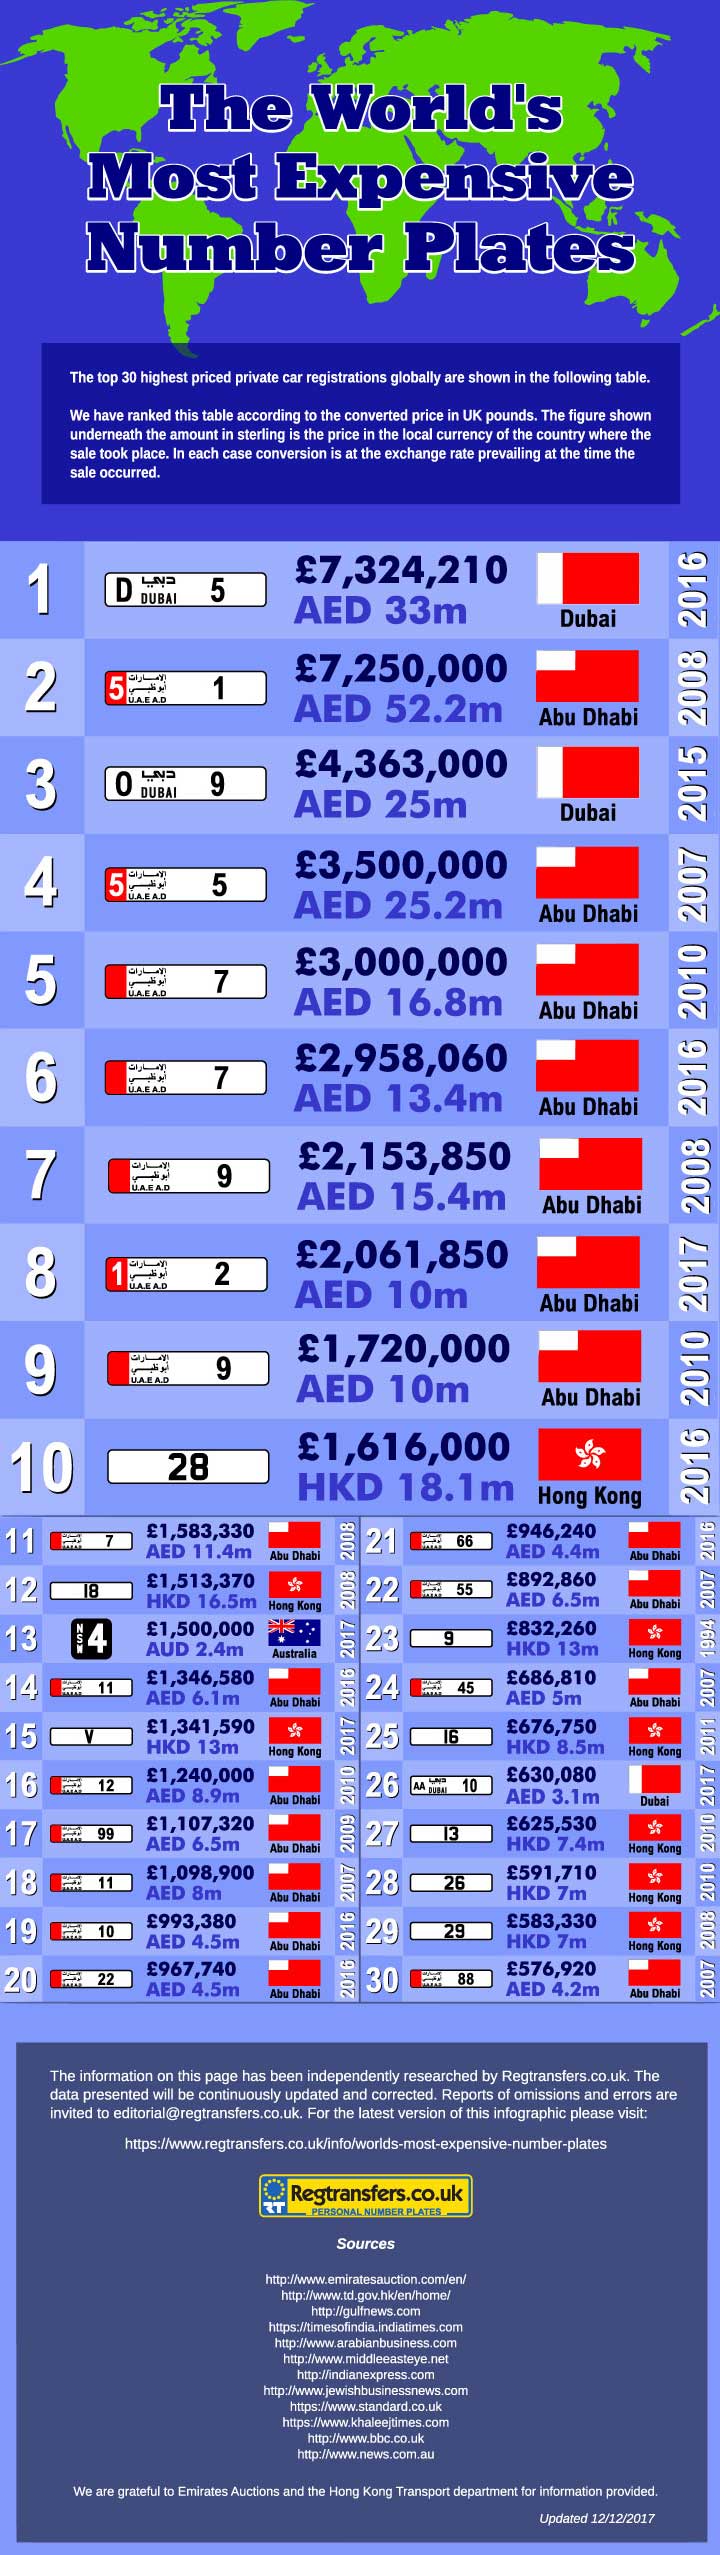 Most Expensive Number Plates World Infographic